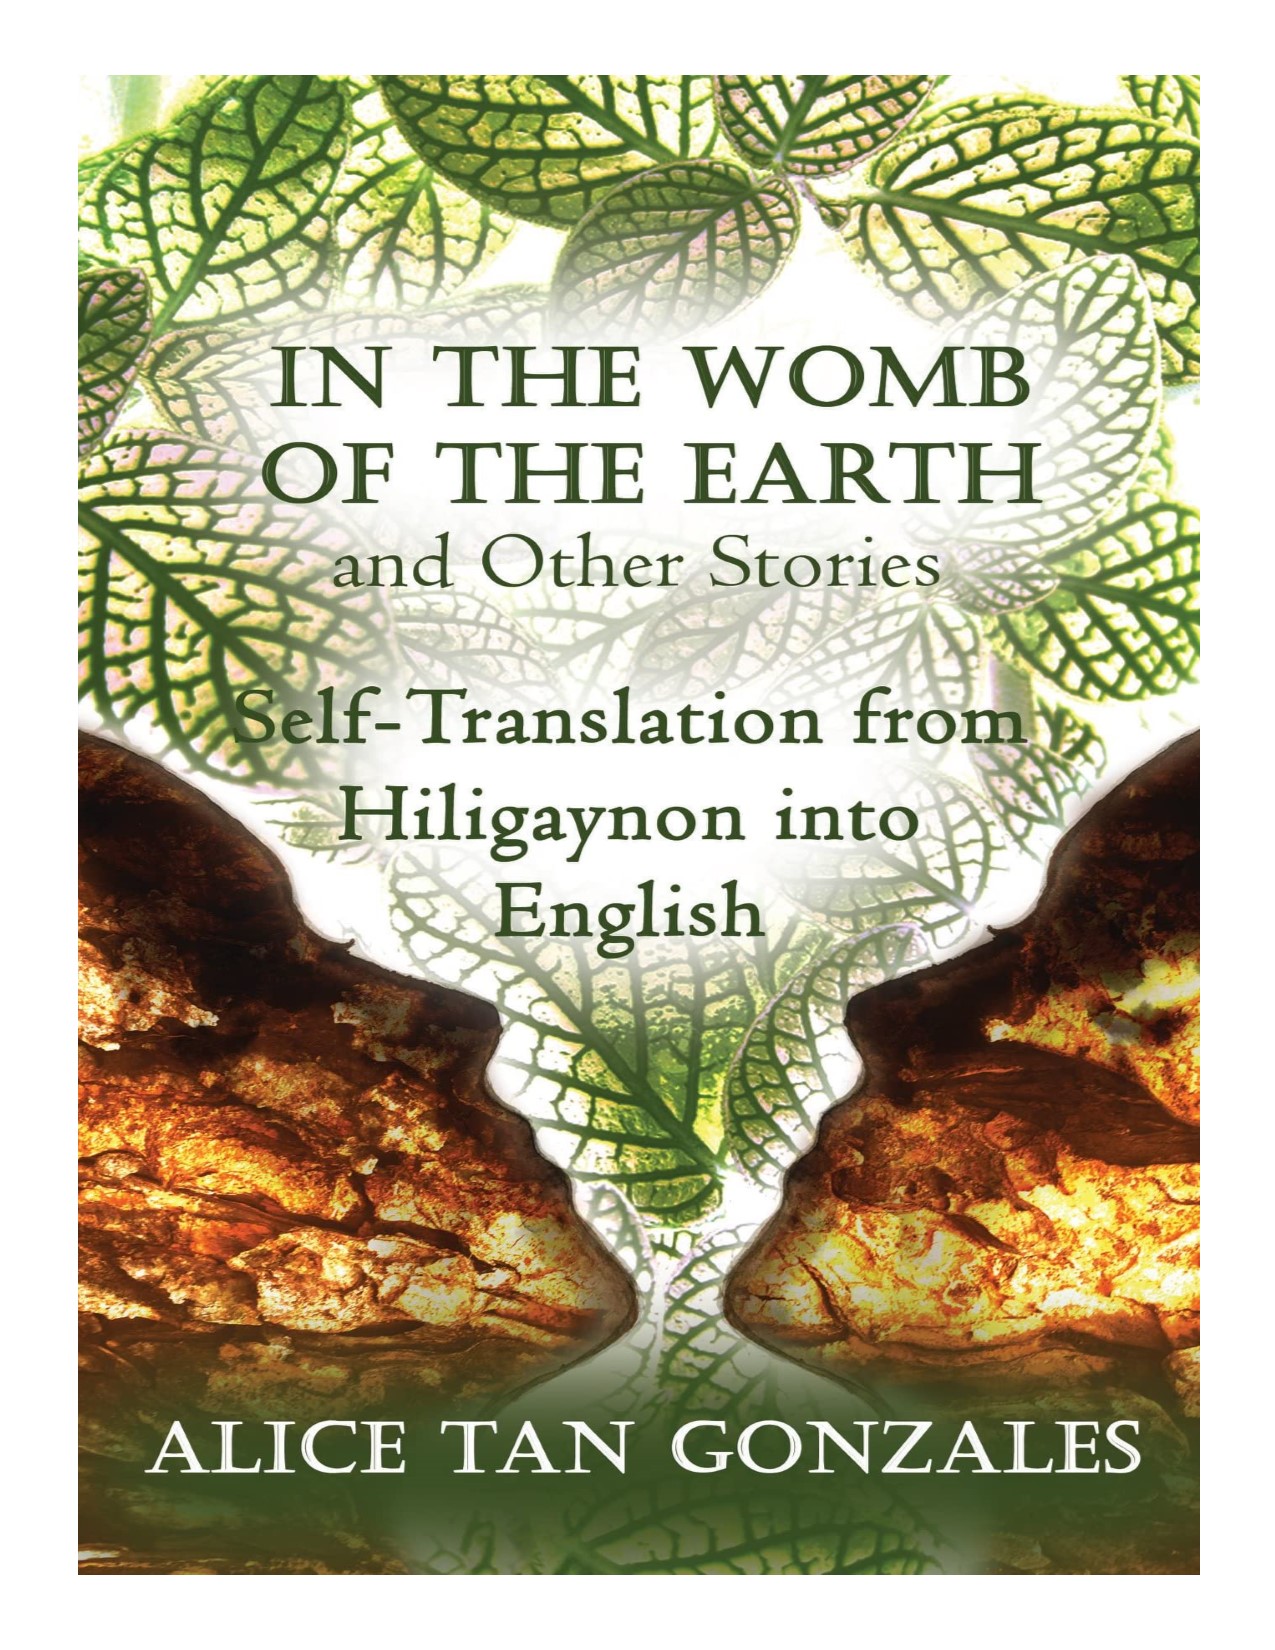 In the womb of the earth and other stories : self-translation from Hiligaynon into English